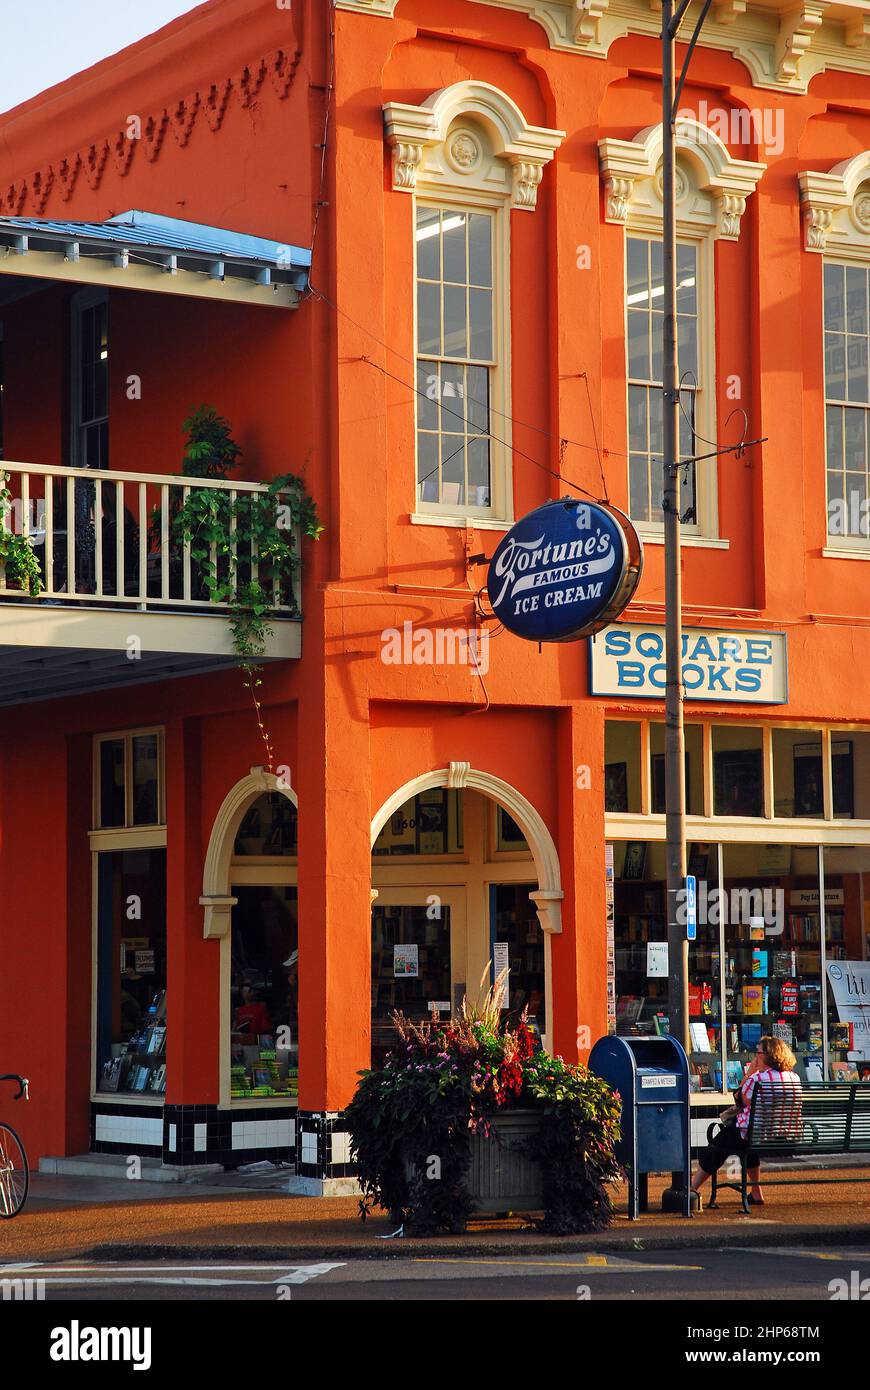 Square Books, a highly respected independent book store, stands on the main square of Oxford, Mississippi Stock Photo